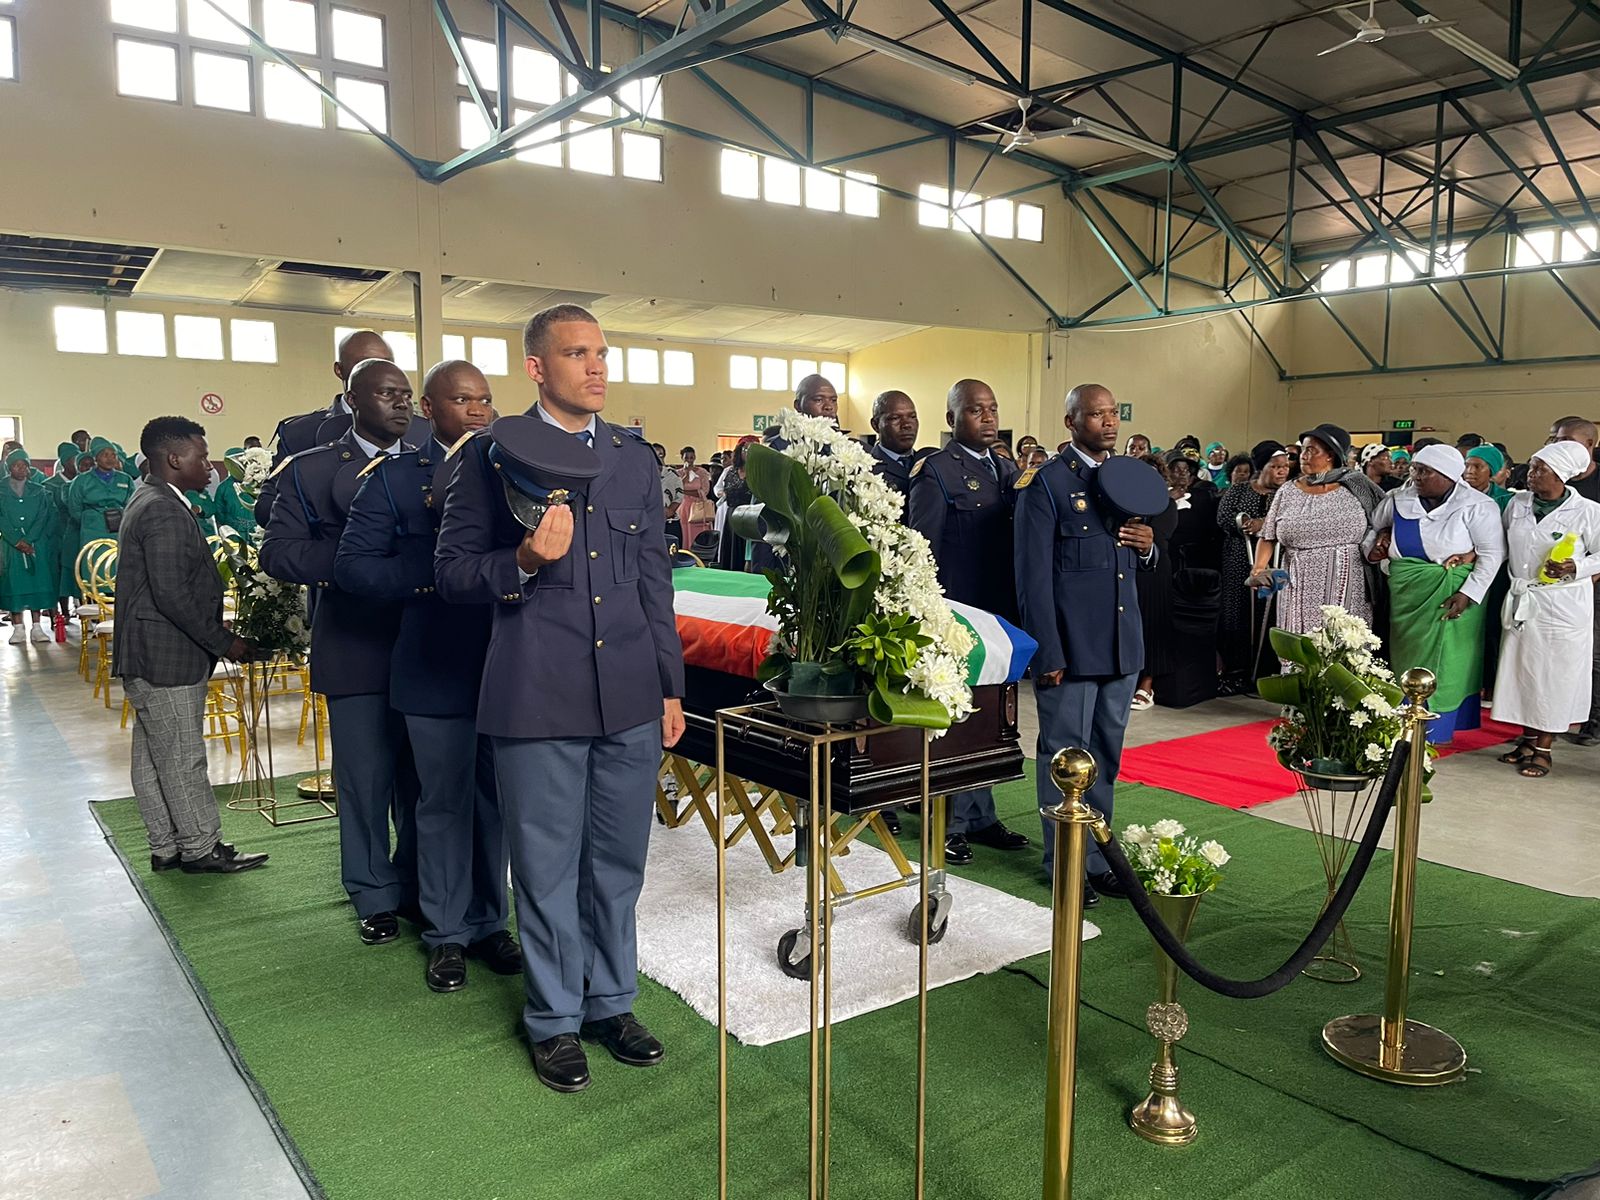 Durban police officer who was killed in M7 truck crash laid to rest